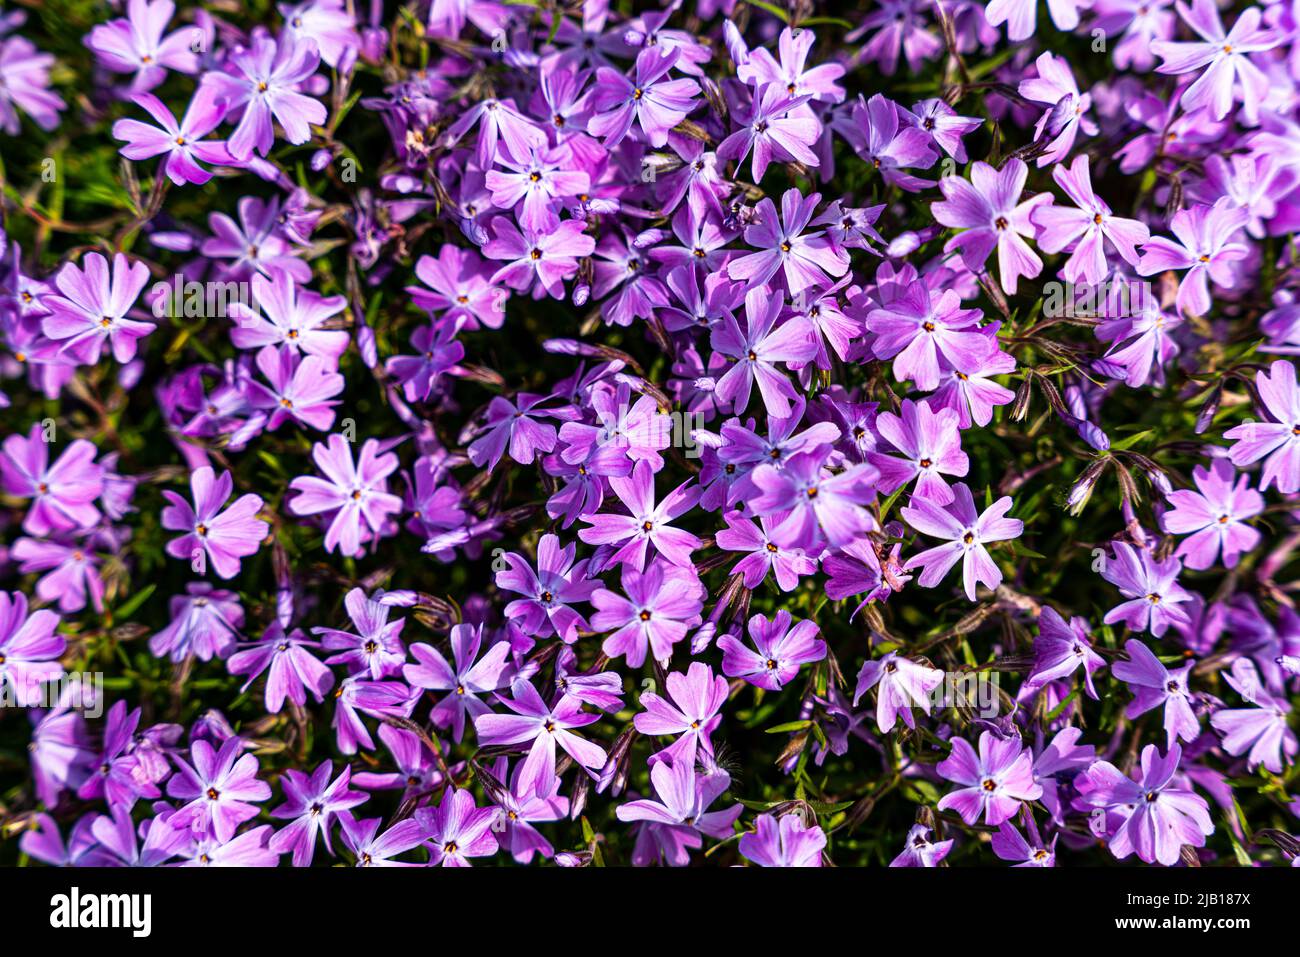 Tufted phlox (Phlox douglasii) 'Crackerjack' blooms in the plant nursery in early June. High quality photo Stock Photo